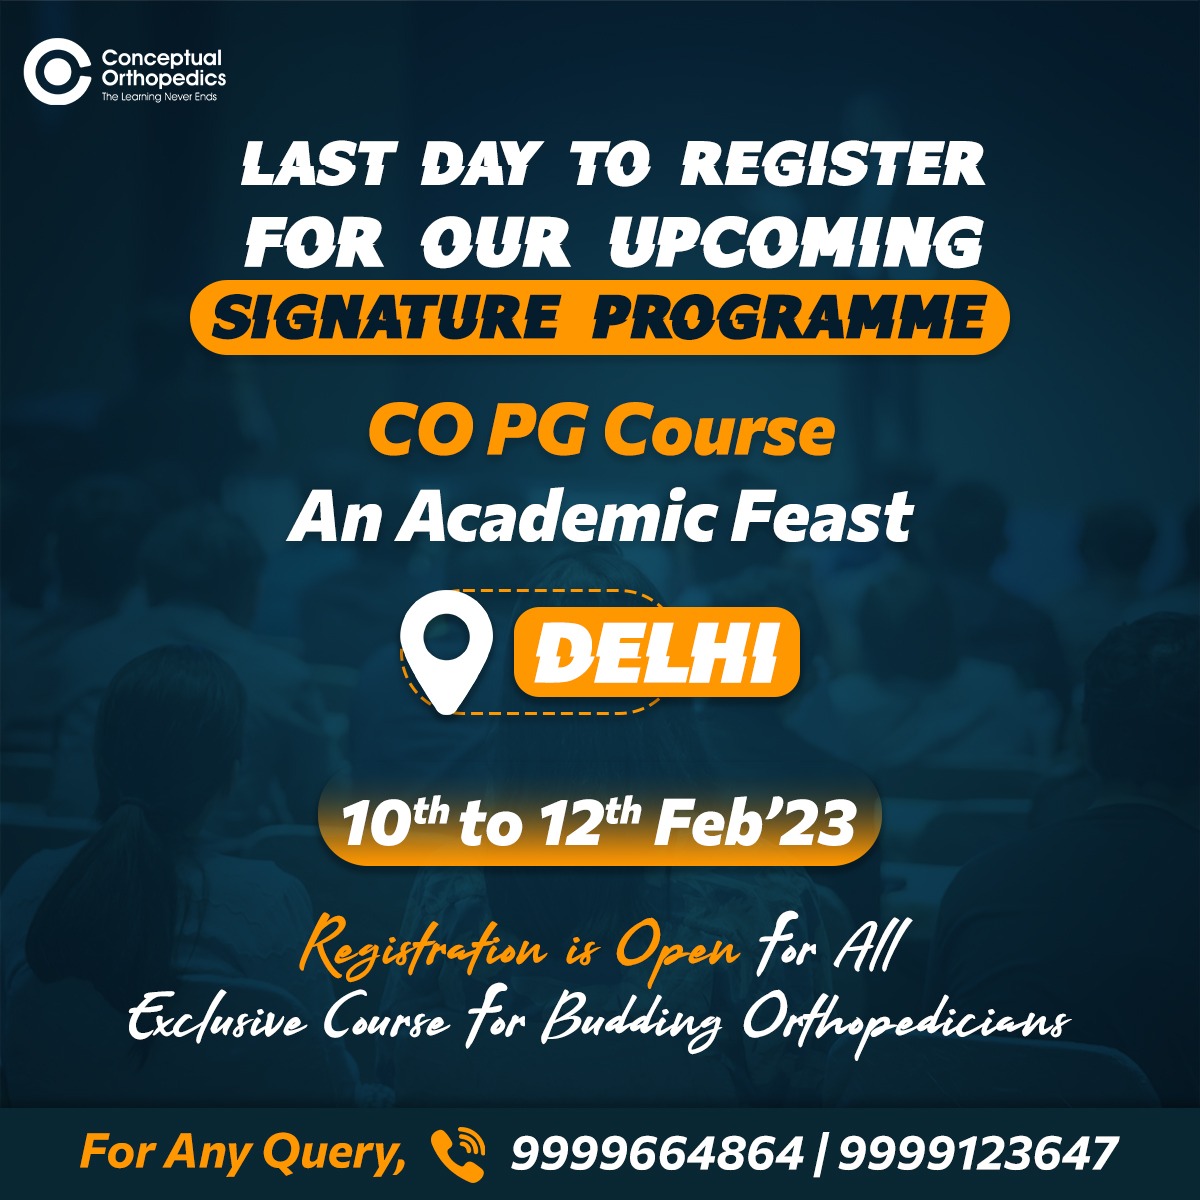 We are hosting our Signature CO PG COURSE - An Academic Feast 
in the following city and dates:

Delhi from February 10–12, 2023

For Any Query, Please Feel Free To Contact At Our Helpdesk: 9999664864 |  9999123647

#conceptualorthopedics #copgcourse #drapurvmehra #orthopedics